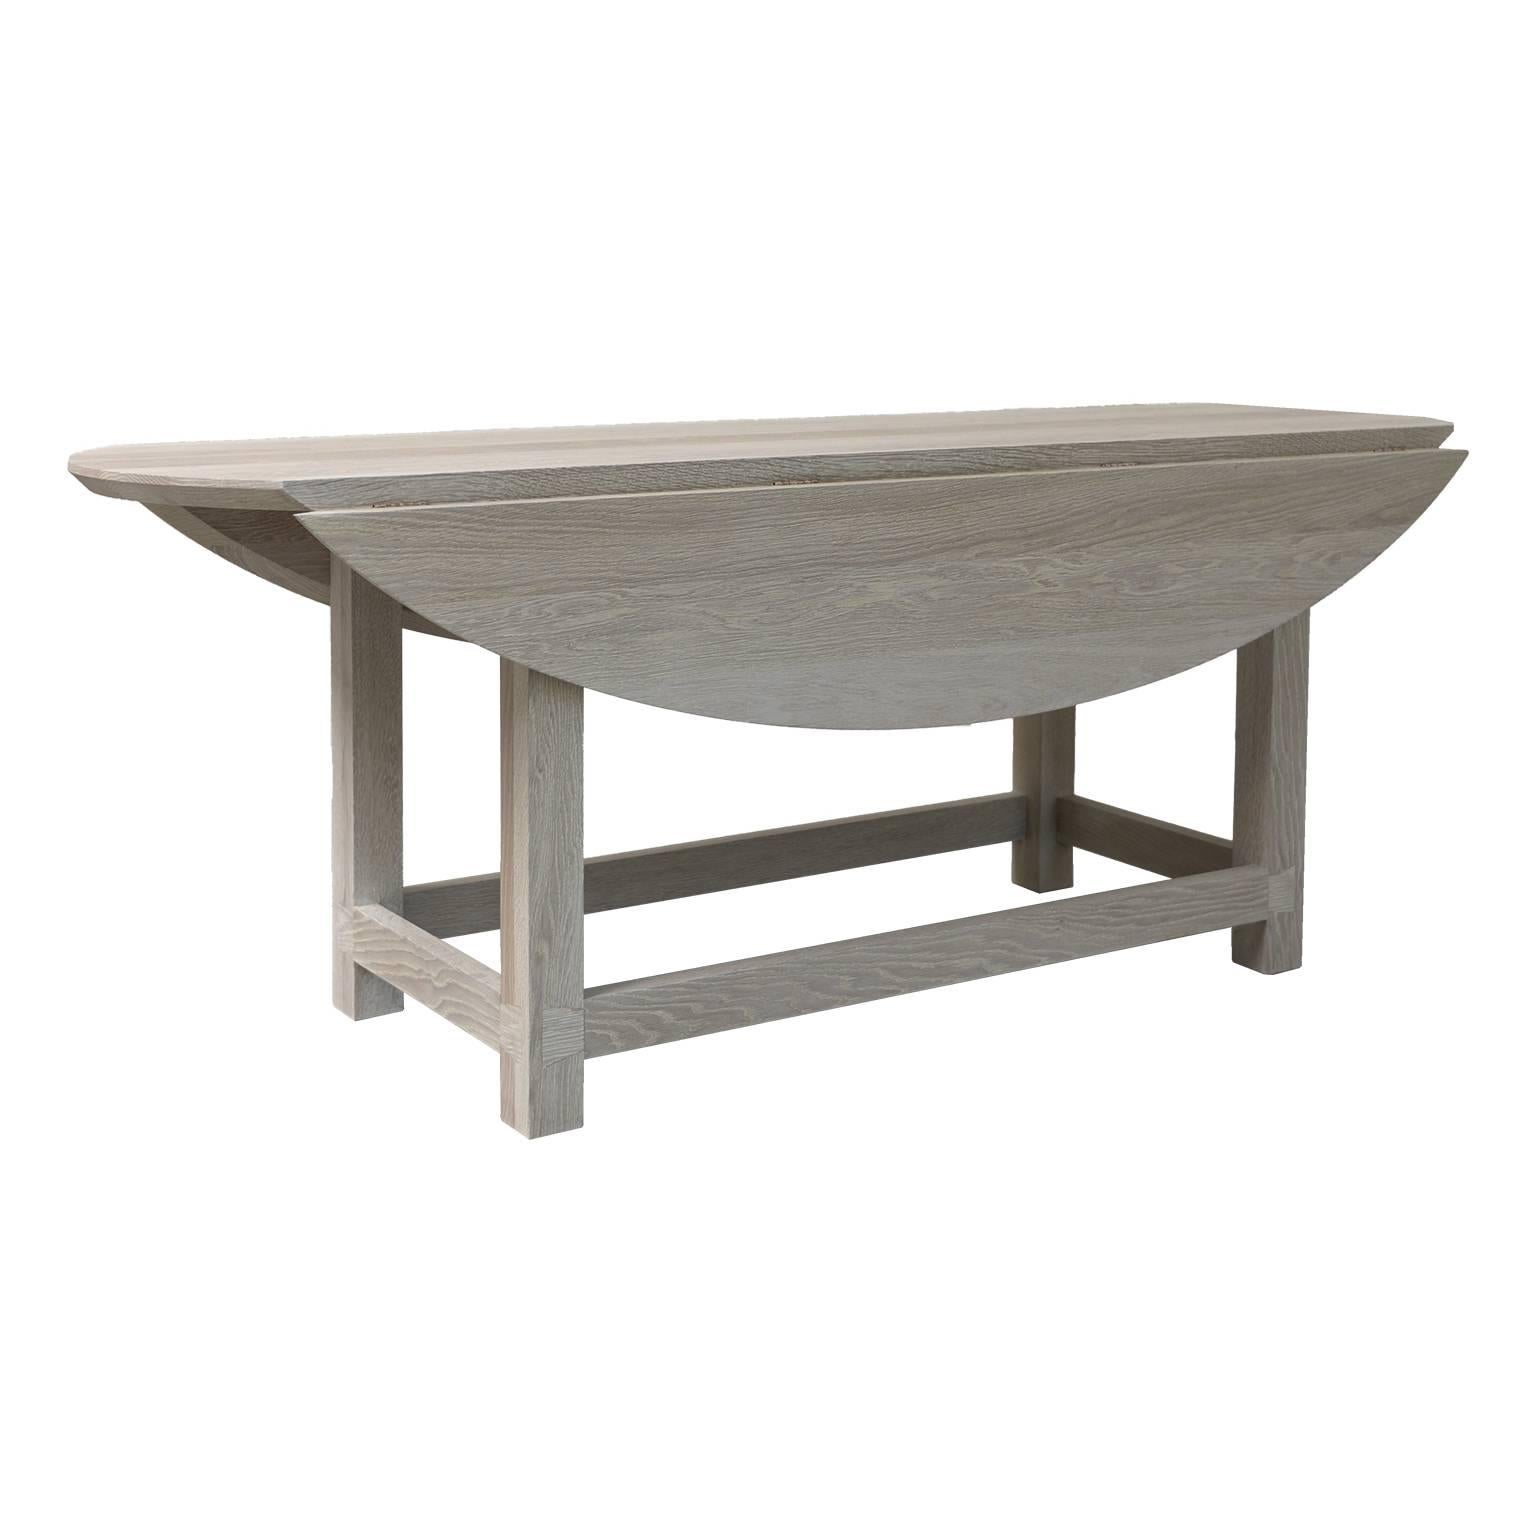 am designs dining table or console, in bleached massive oak. Gate leg model.